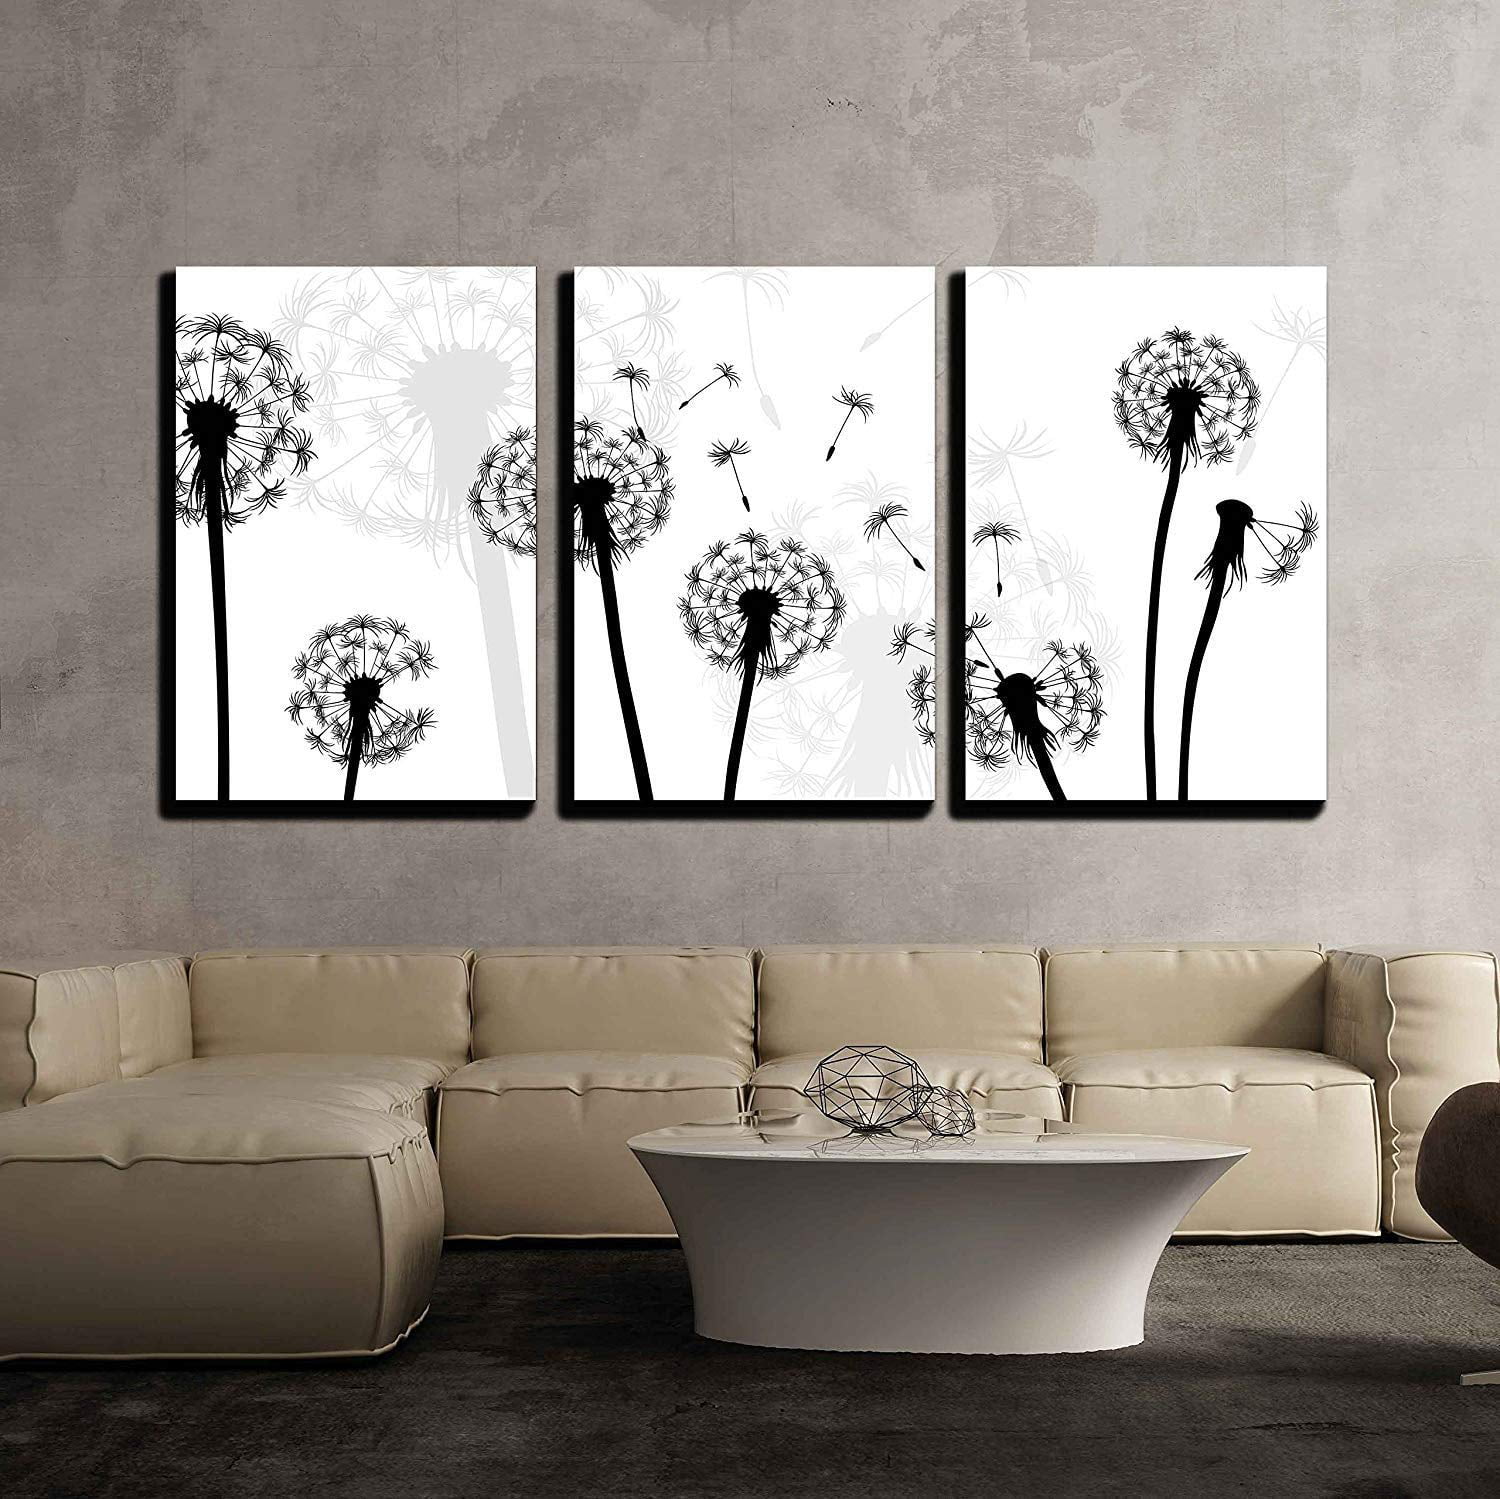 wall26 3 Piece Canvas Wall Art - and White Style Dandelion - Modern Home Decor Stretched and Ready to Hang - Panels - Walmart.com